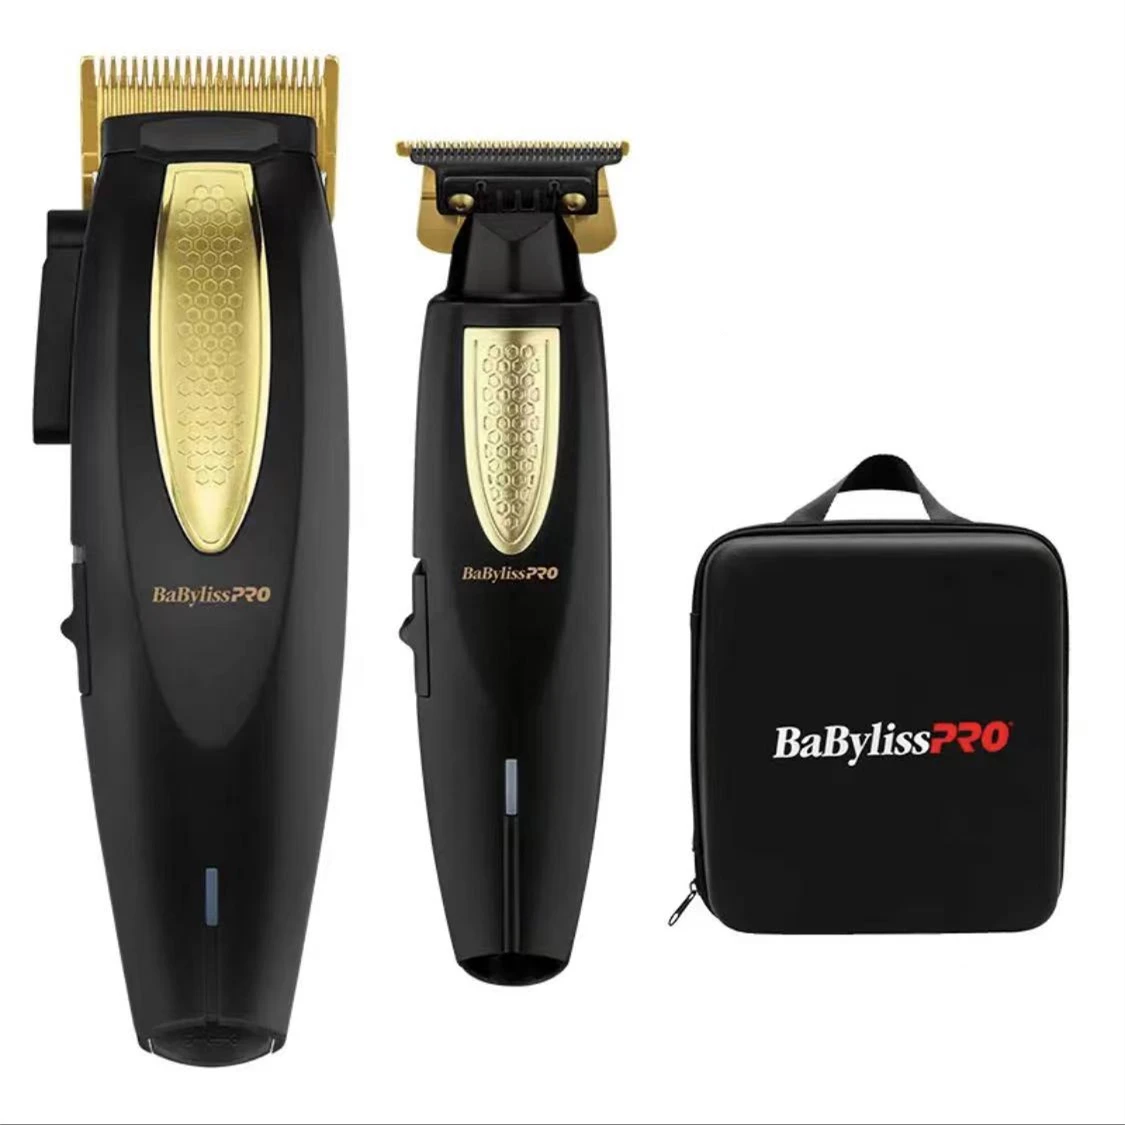 

BABYLISS PRO 100% Genuine Original Professional men's hair clipper, beard trimmer Wireless electric hair clipper Barber tools